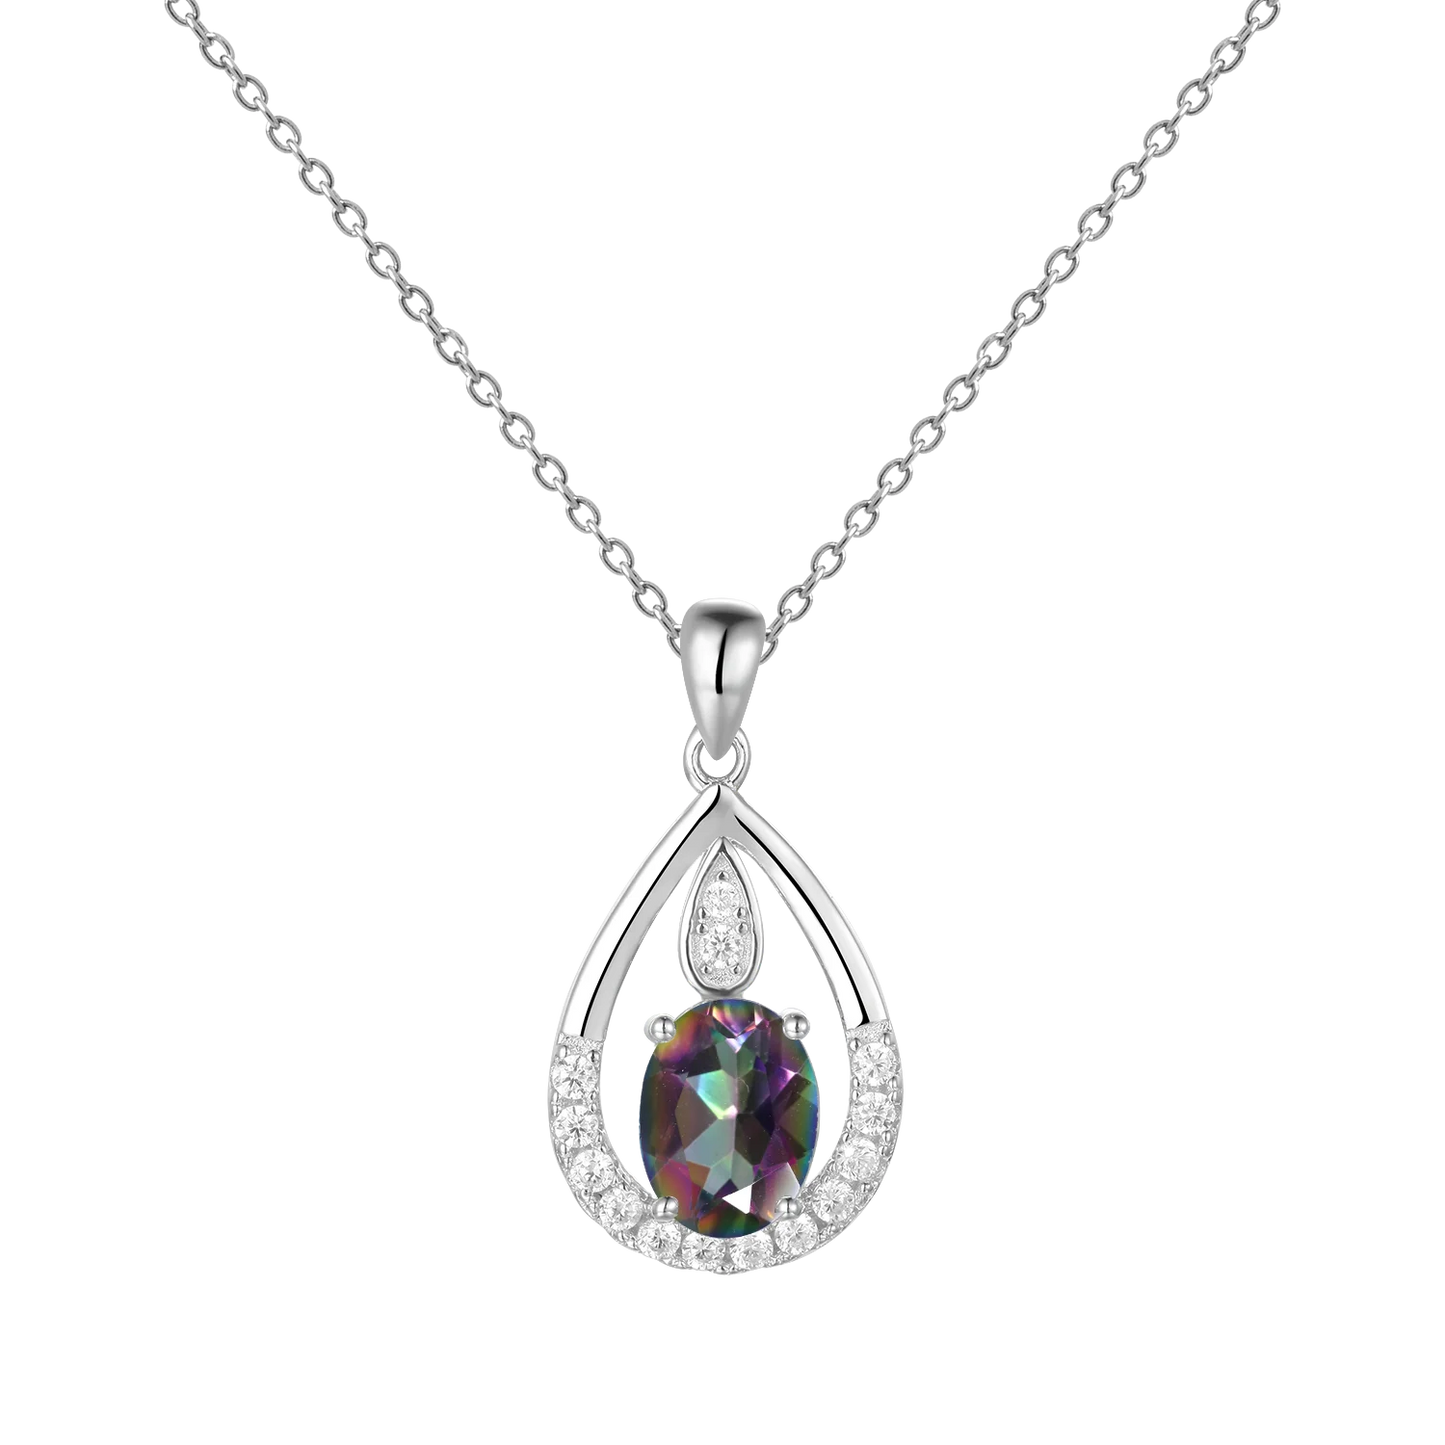 Gem's Ballet December Birthstone Topaz Necklace 6x8mm Oval Pink Topaz Pendant Necklace in 925 Sterling Silver with 18" Chain Rainbow